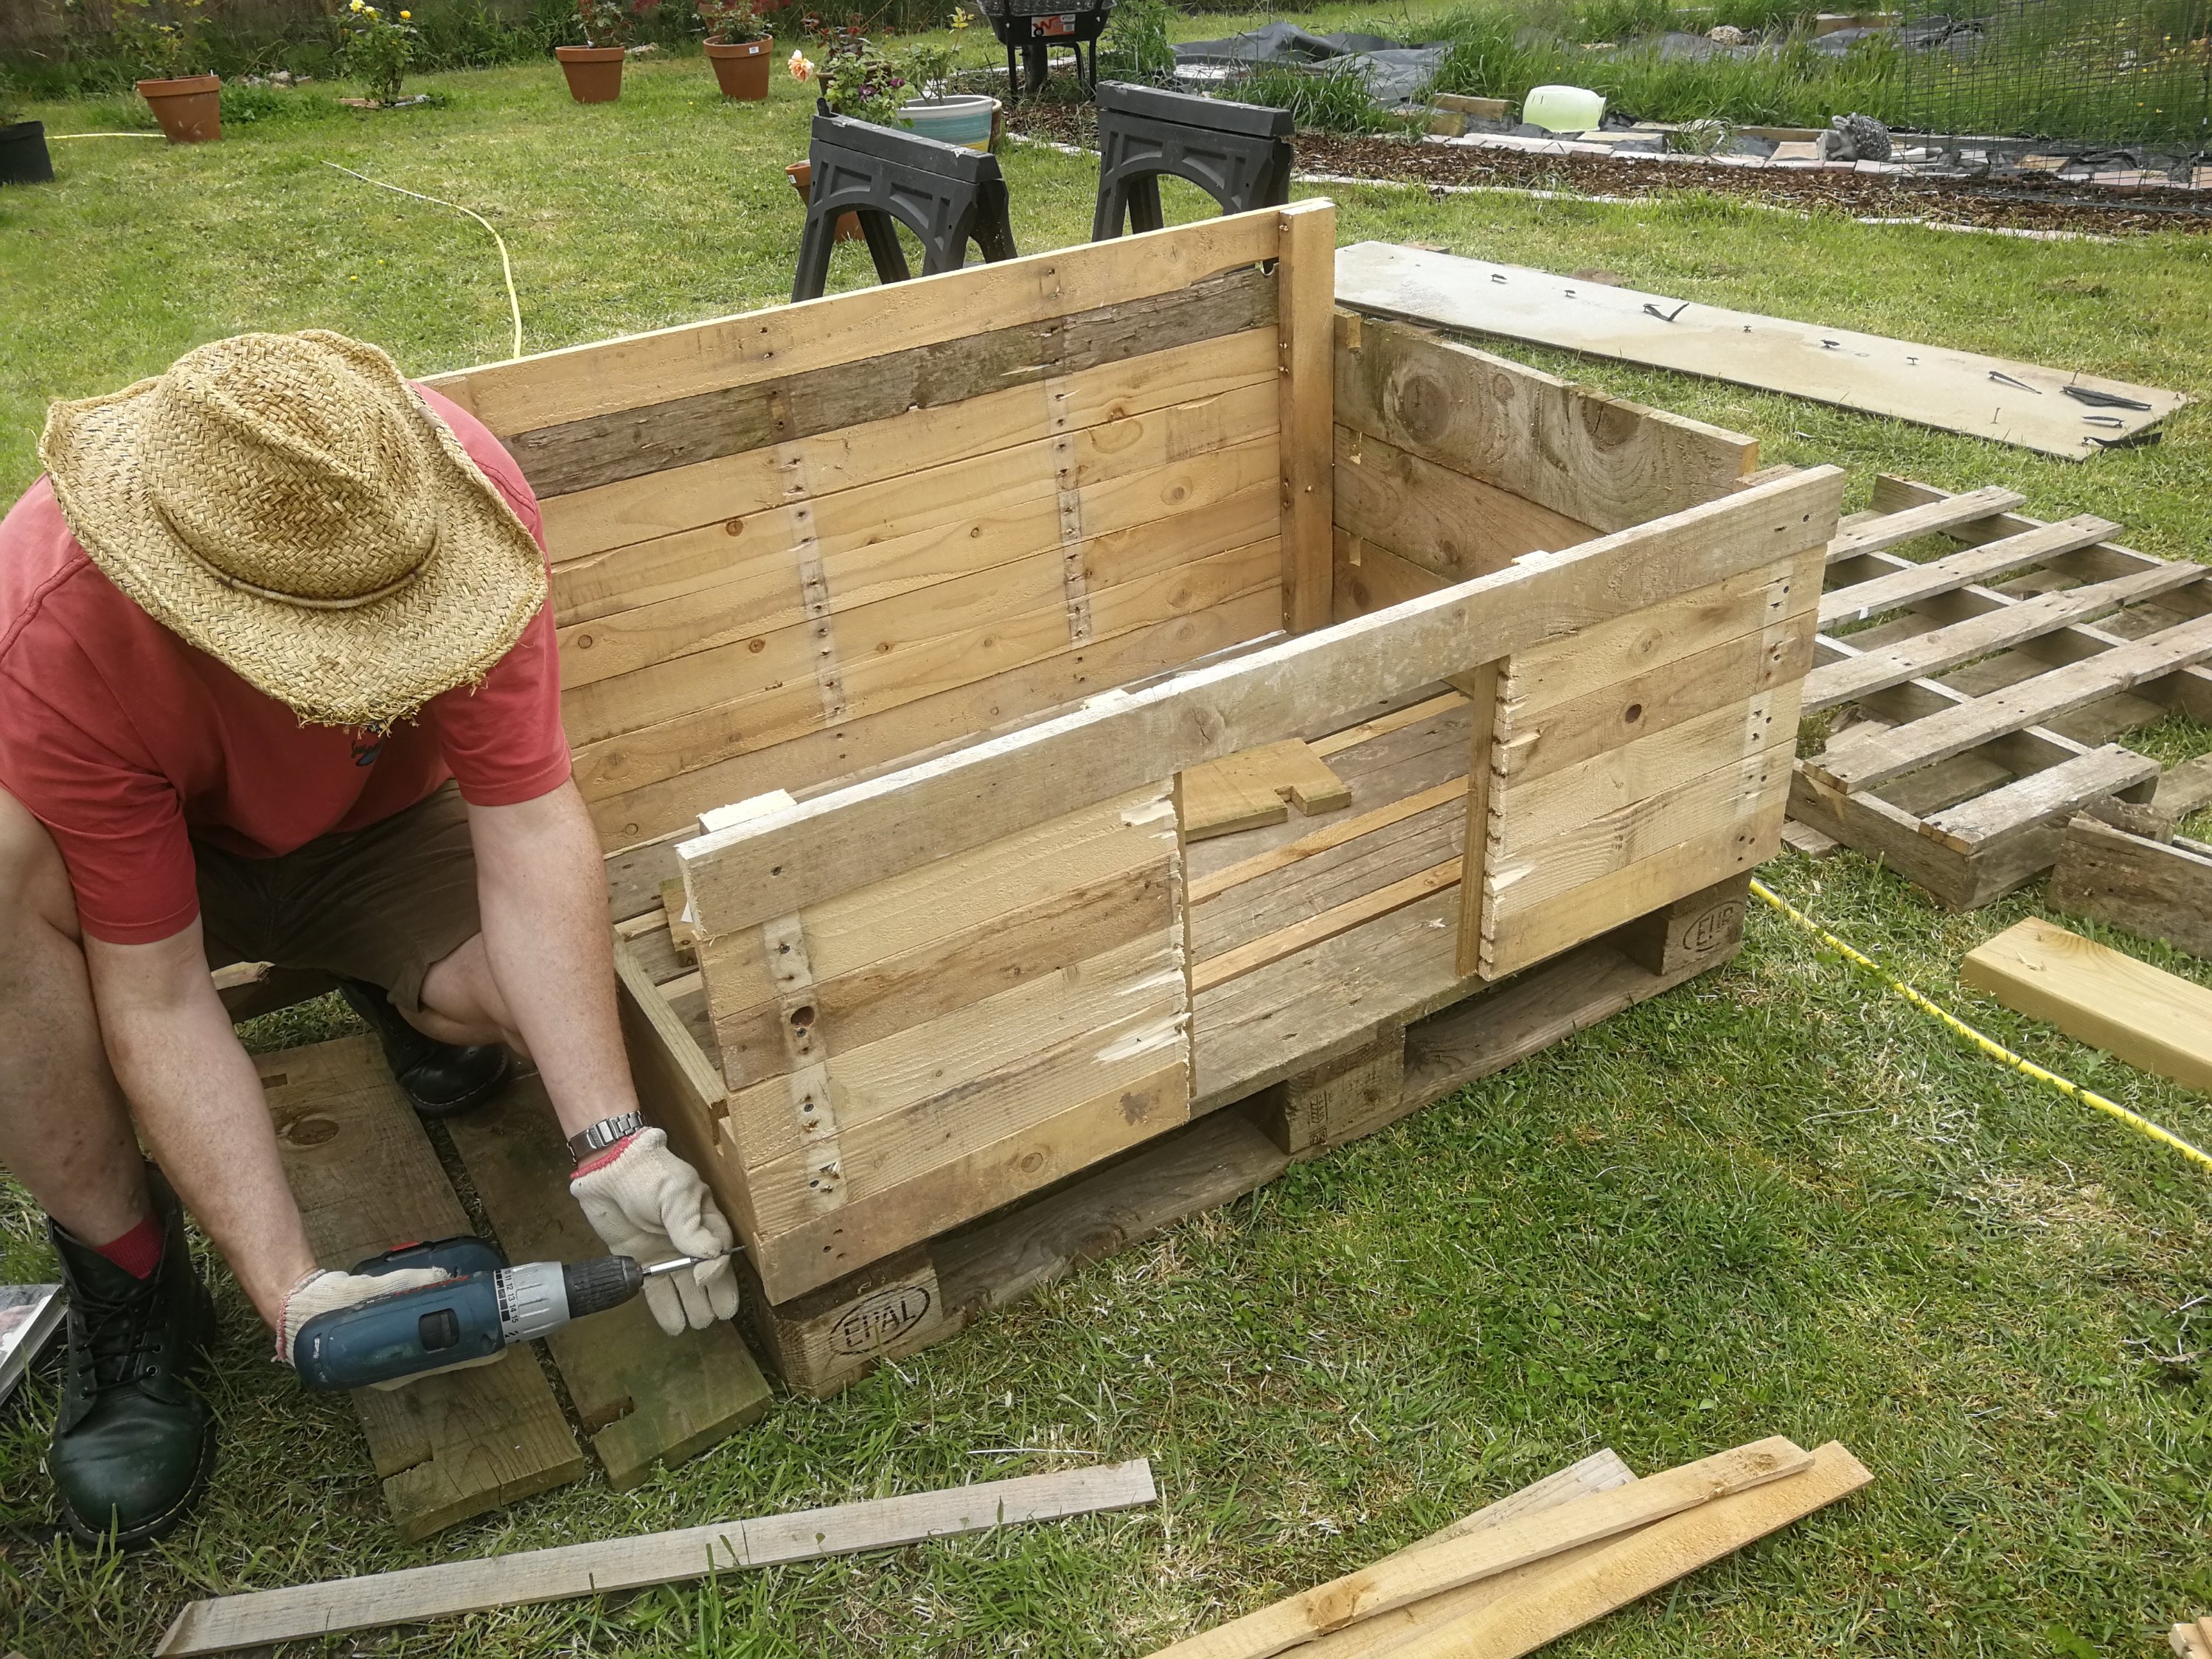 Mr T putting together the Duck house made from used pallets